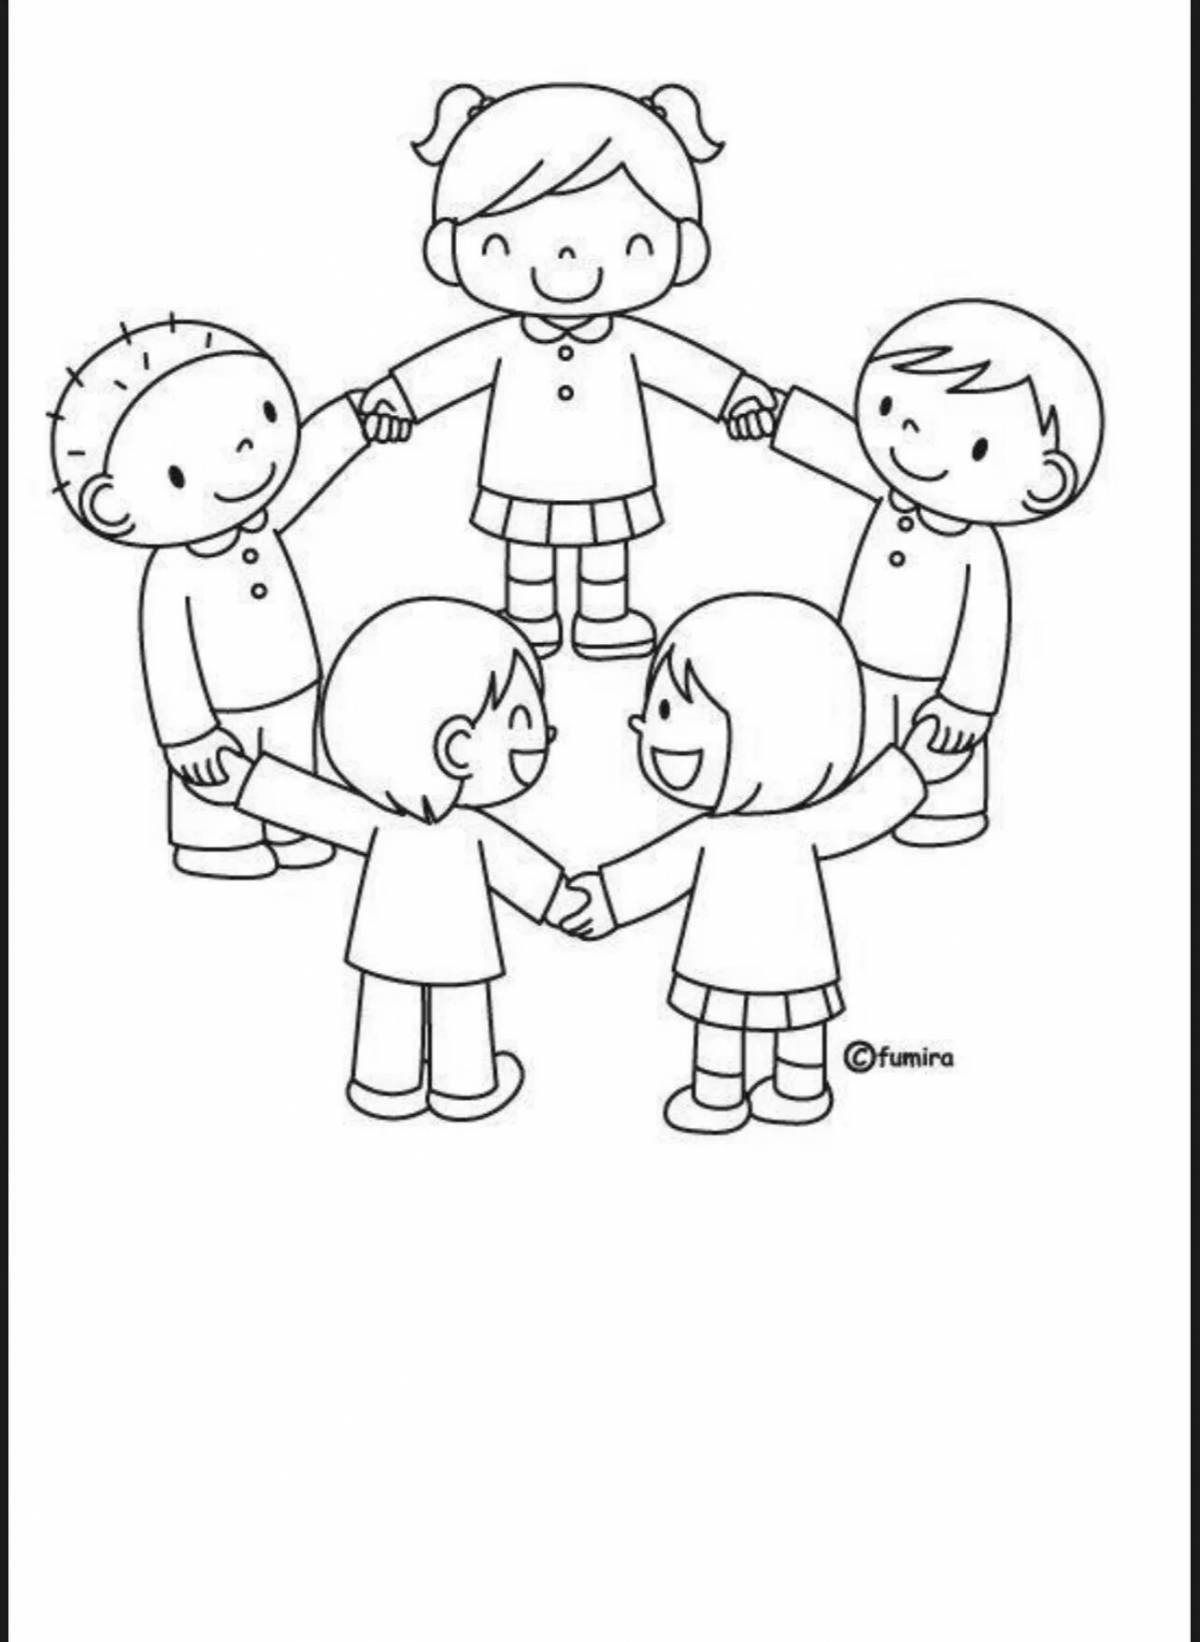 Coloring page peaceful friendship